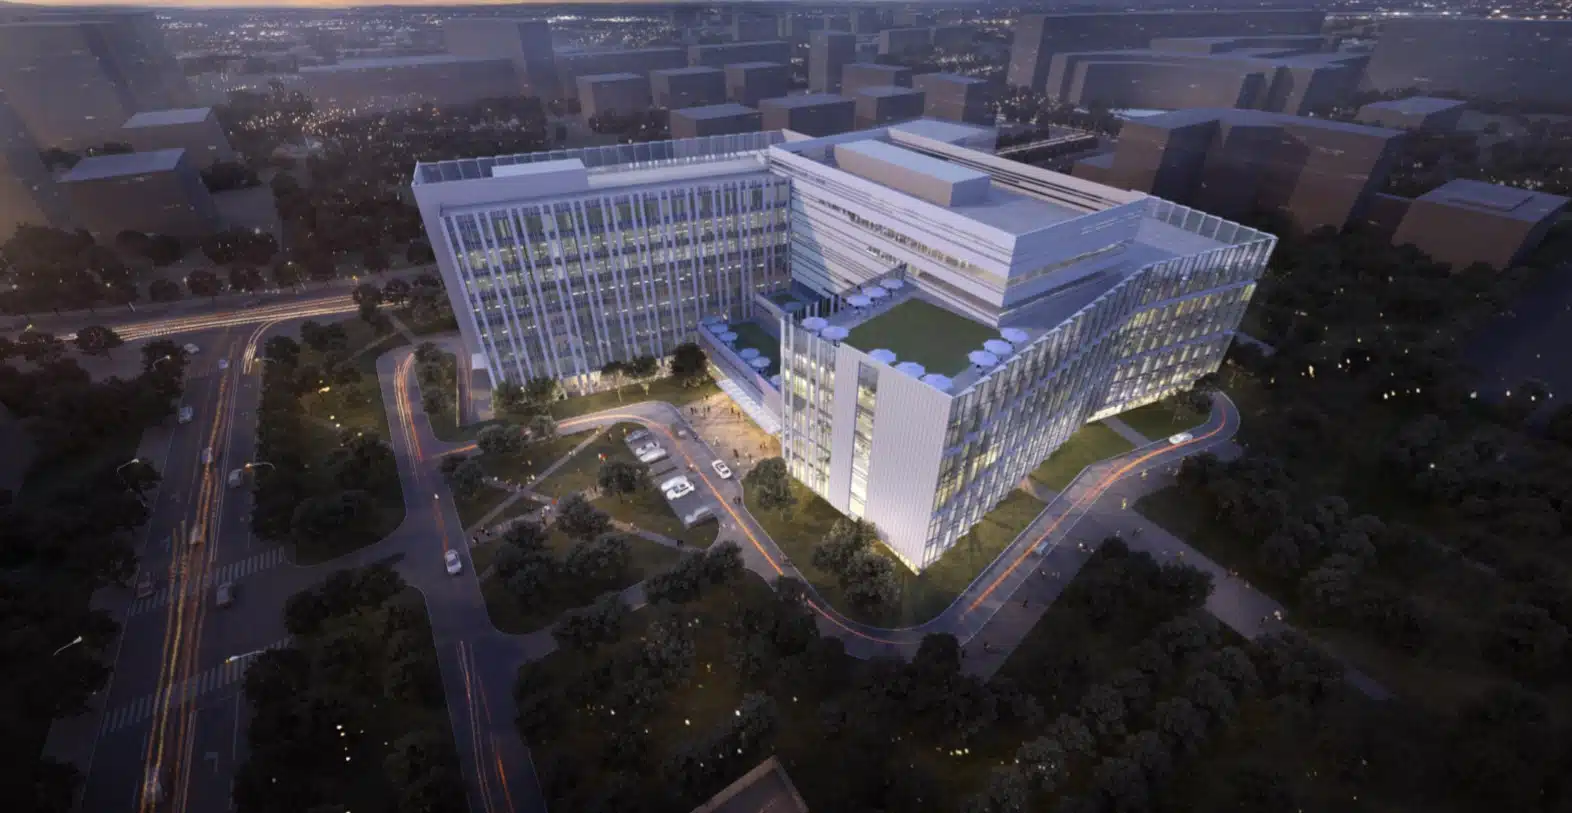 Hillhouse Capital JV commences construction of its research hospital in Beijing